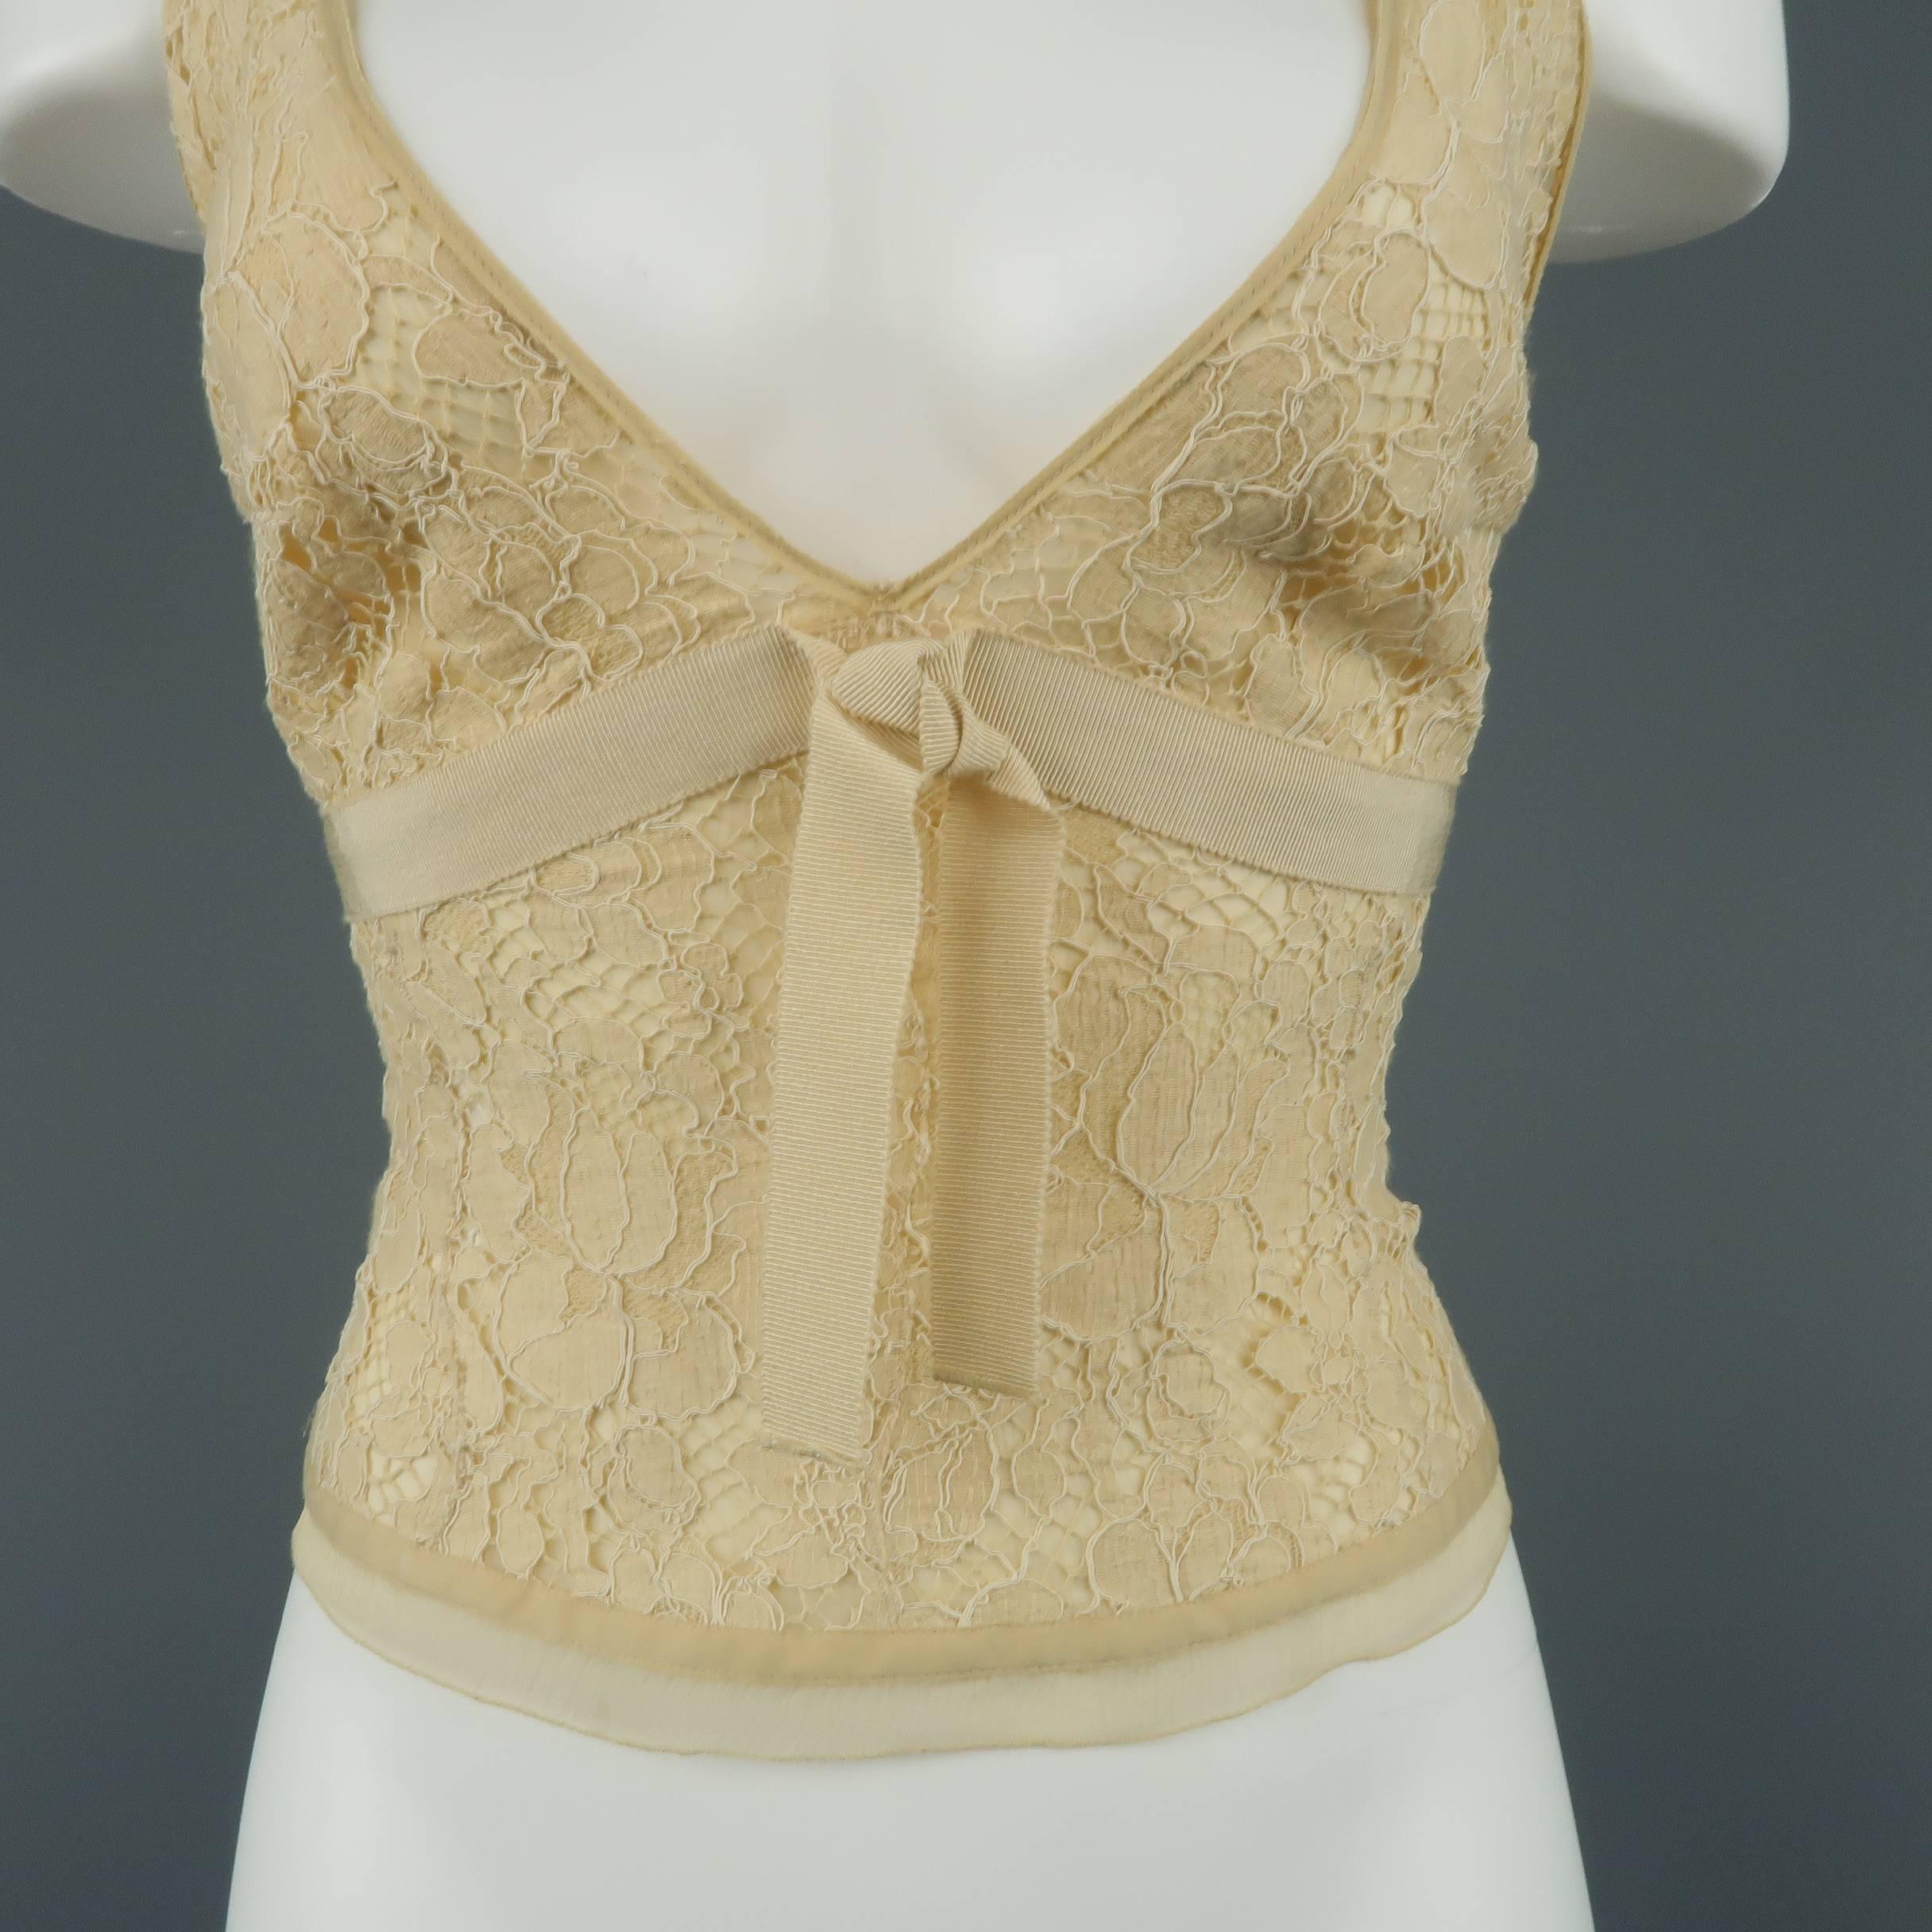 PRADA bralette top comes in beige lace with a chiffon liner and grosgrain ribbon bow waistband. Tears in liner. As-is. Runs very small. Matching skirt available separately. Made in Italy.
 
Fair Pre-Owned Condition.
Marked: IT 44
 
Measurements:
